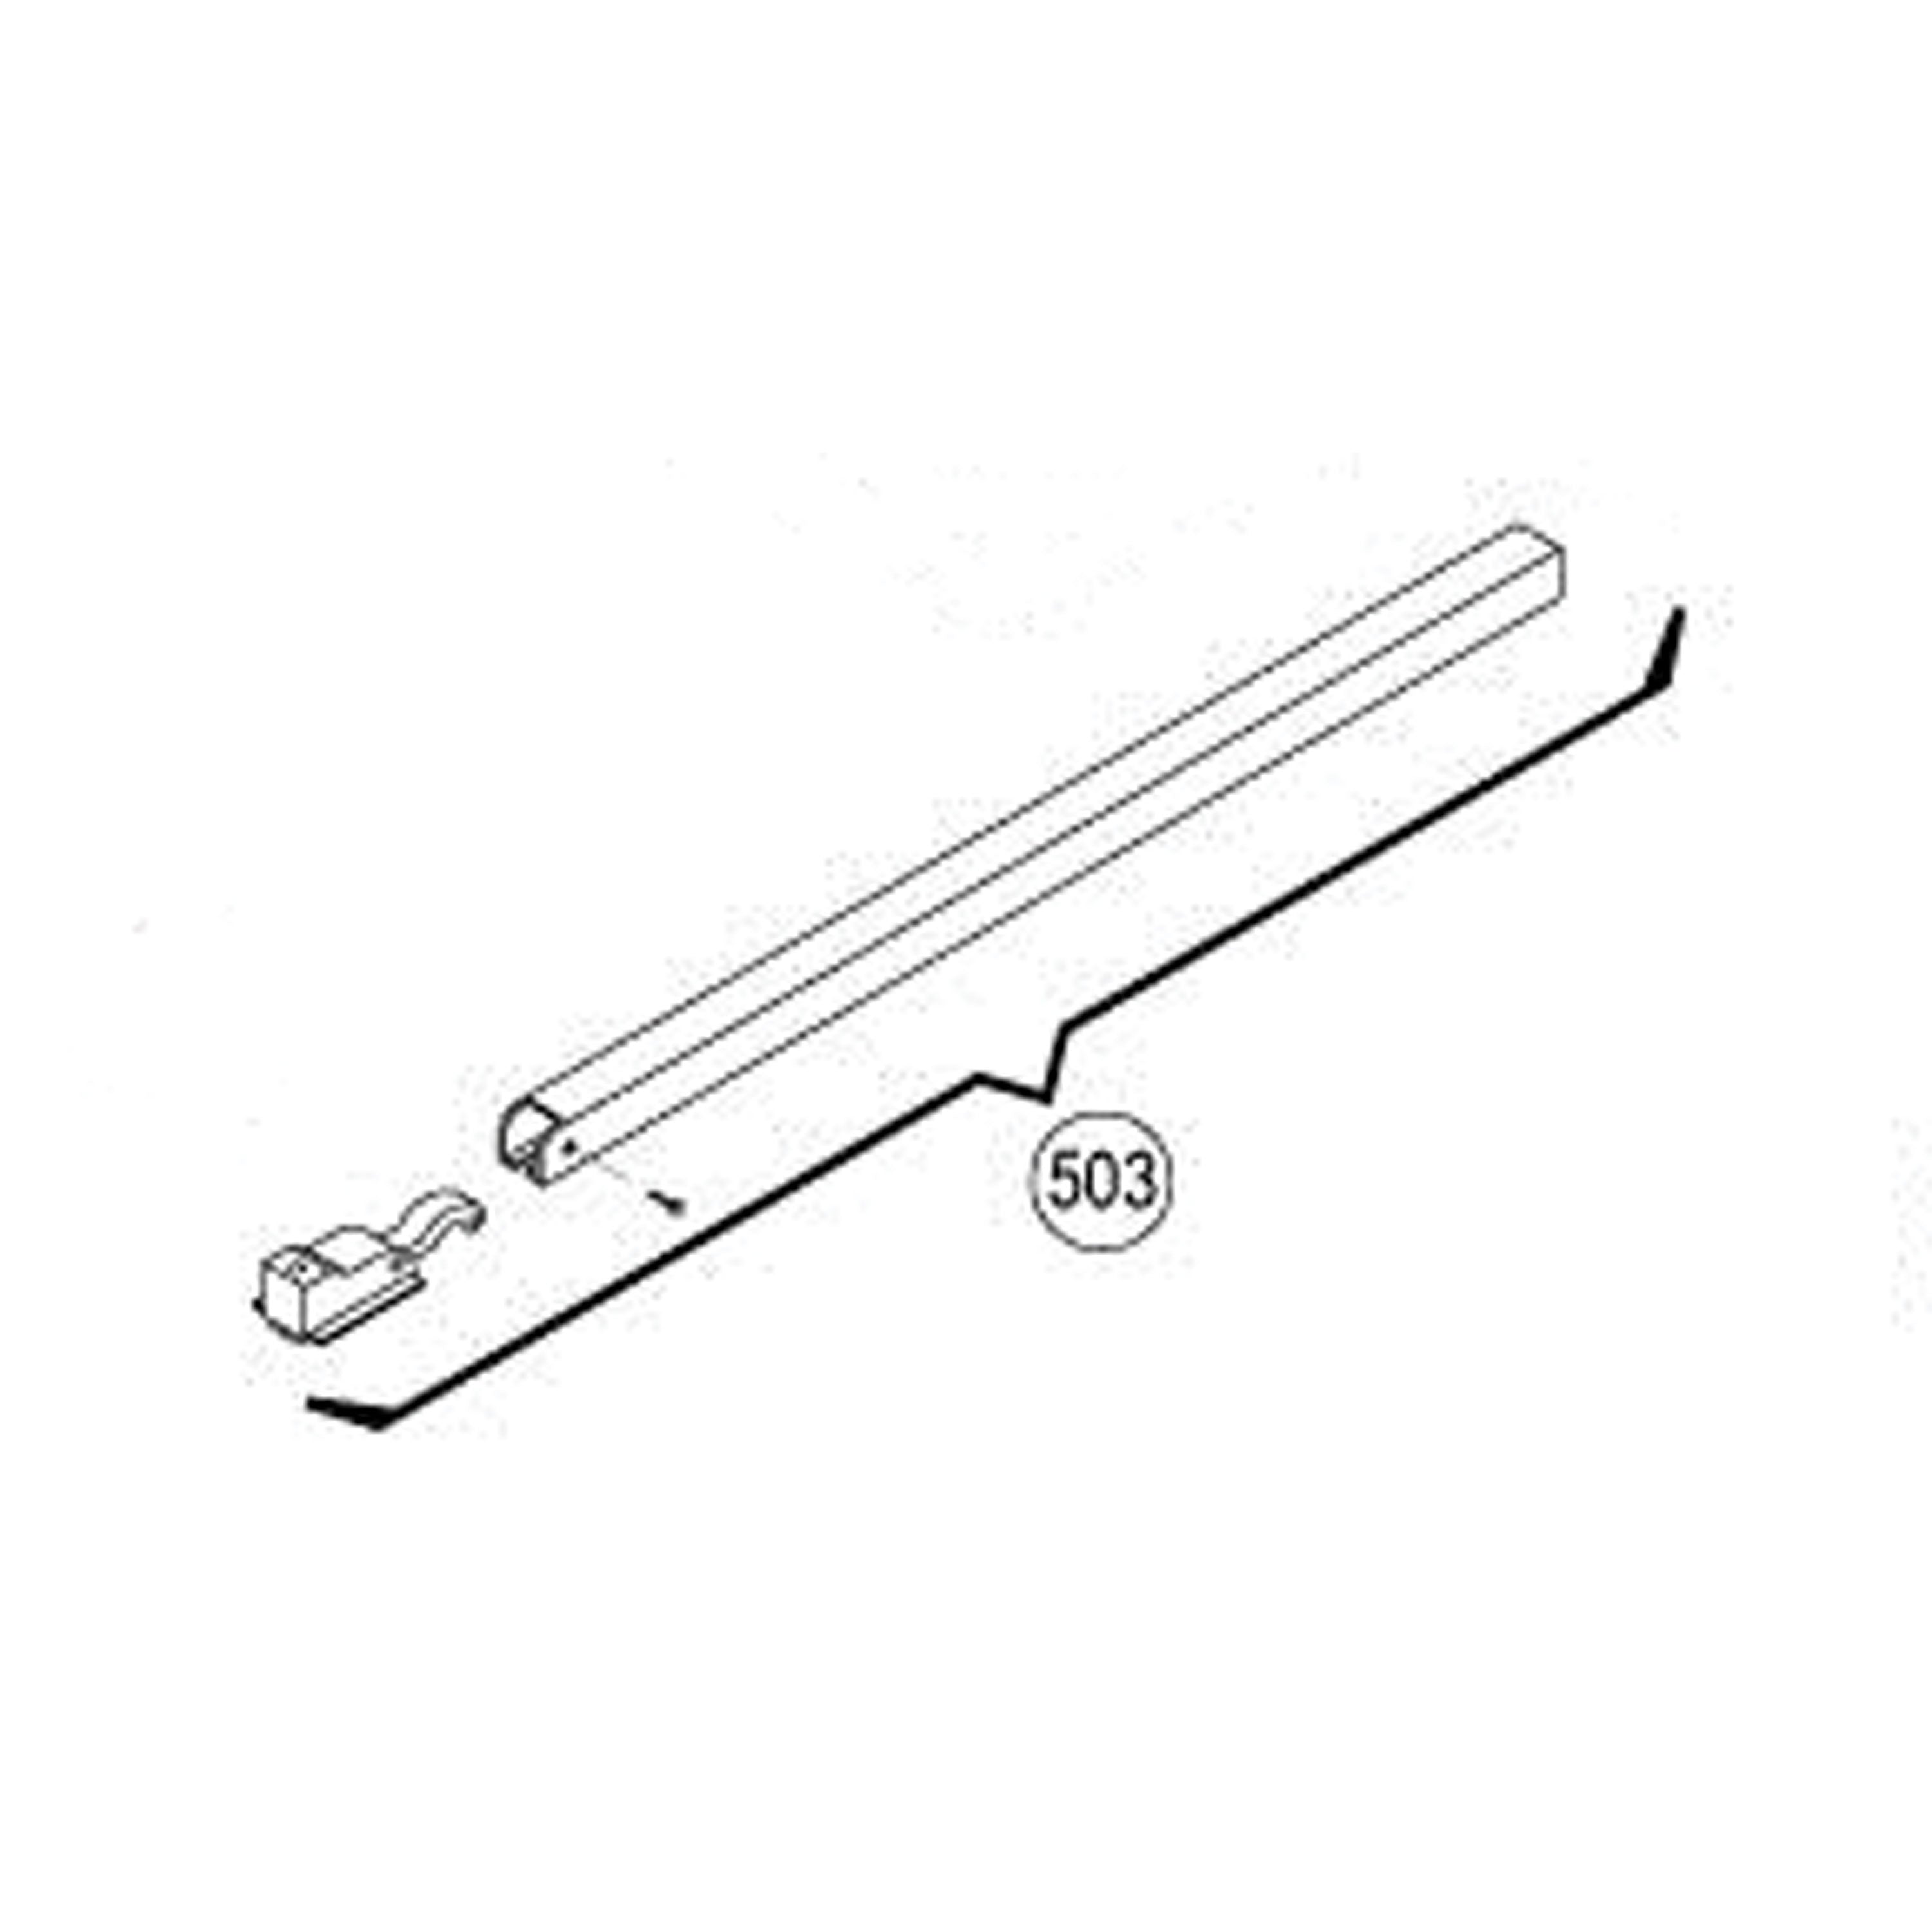 Dometic 3309974.005B Secondary Rafter Arm Service Kit for 8500/Sunchaser - Polar White